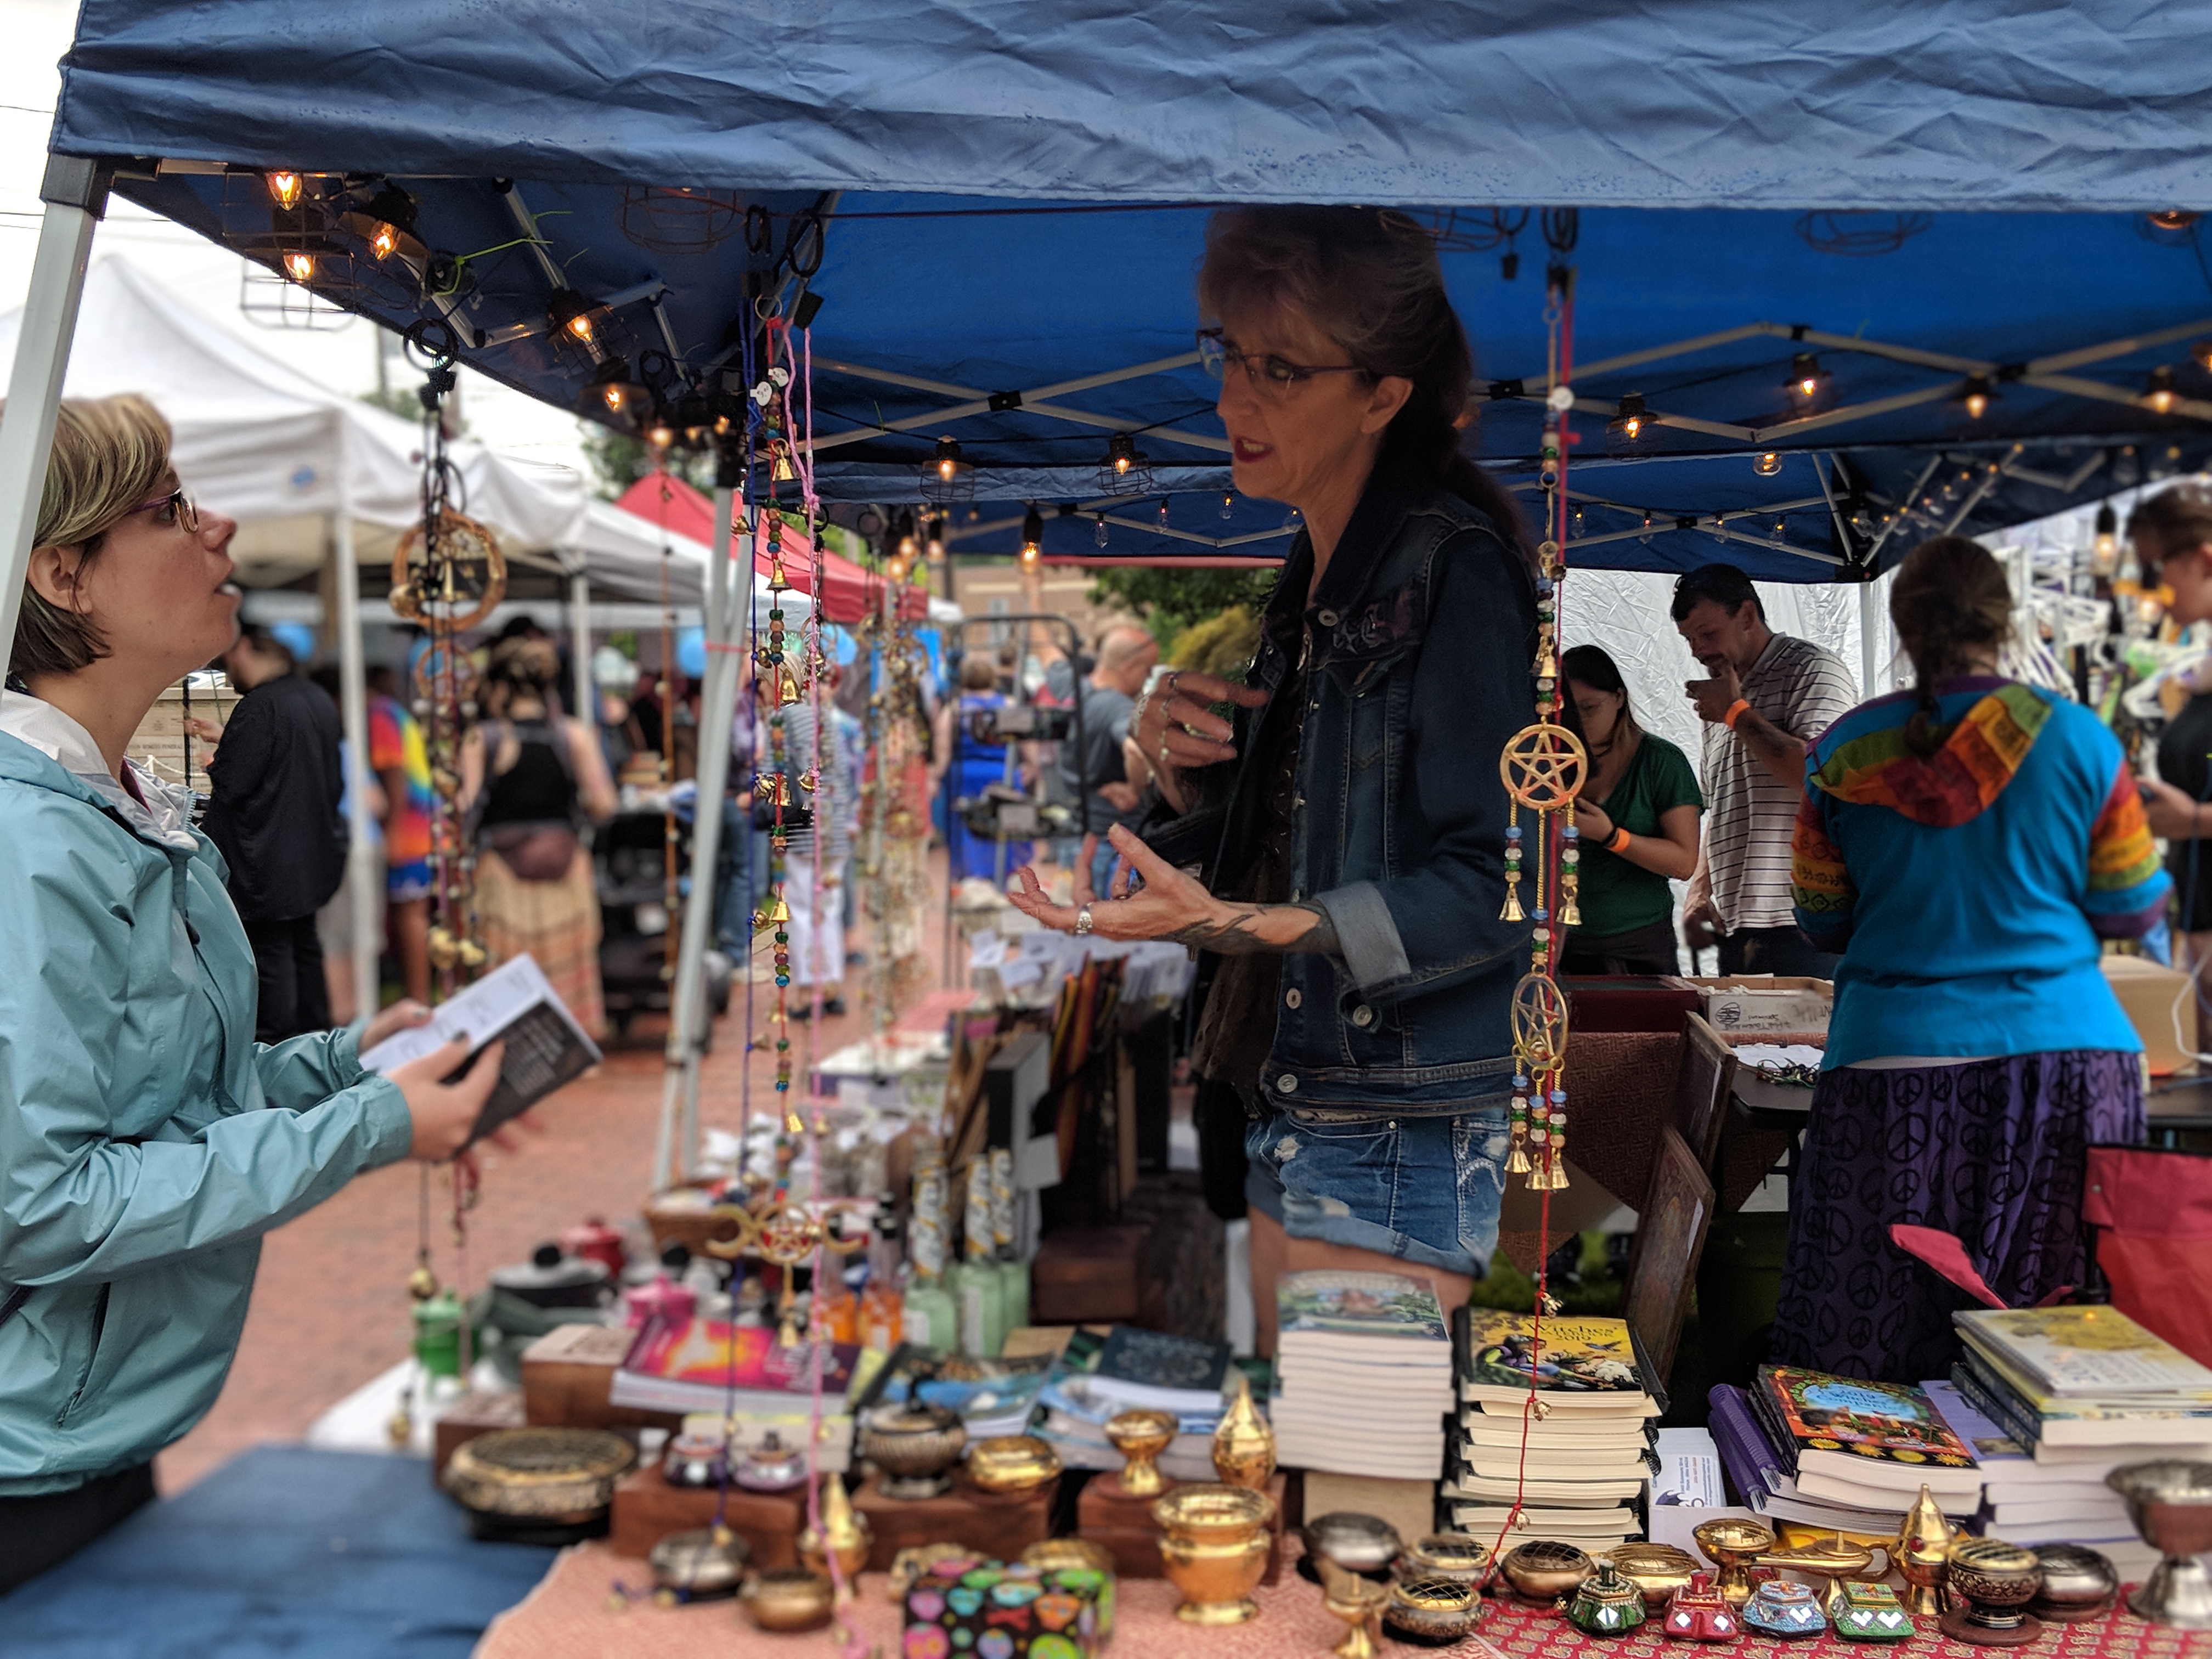 Bedford Historical Society’s Flea Market Event planned for Aug. 12